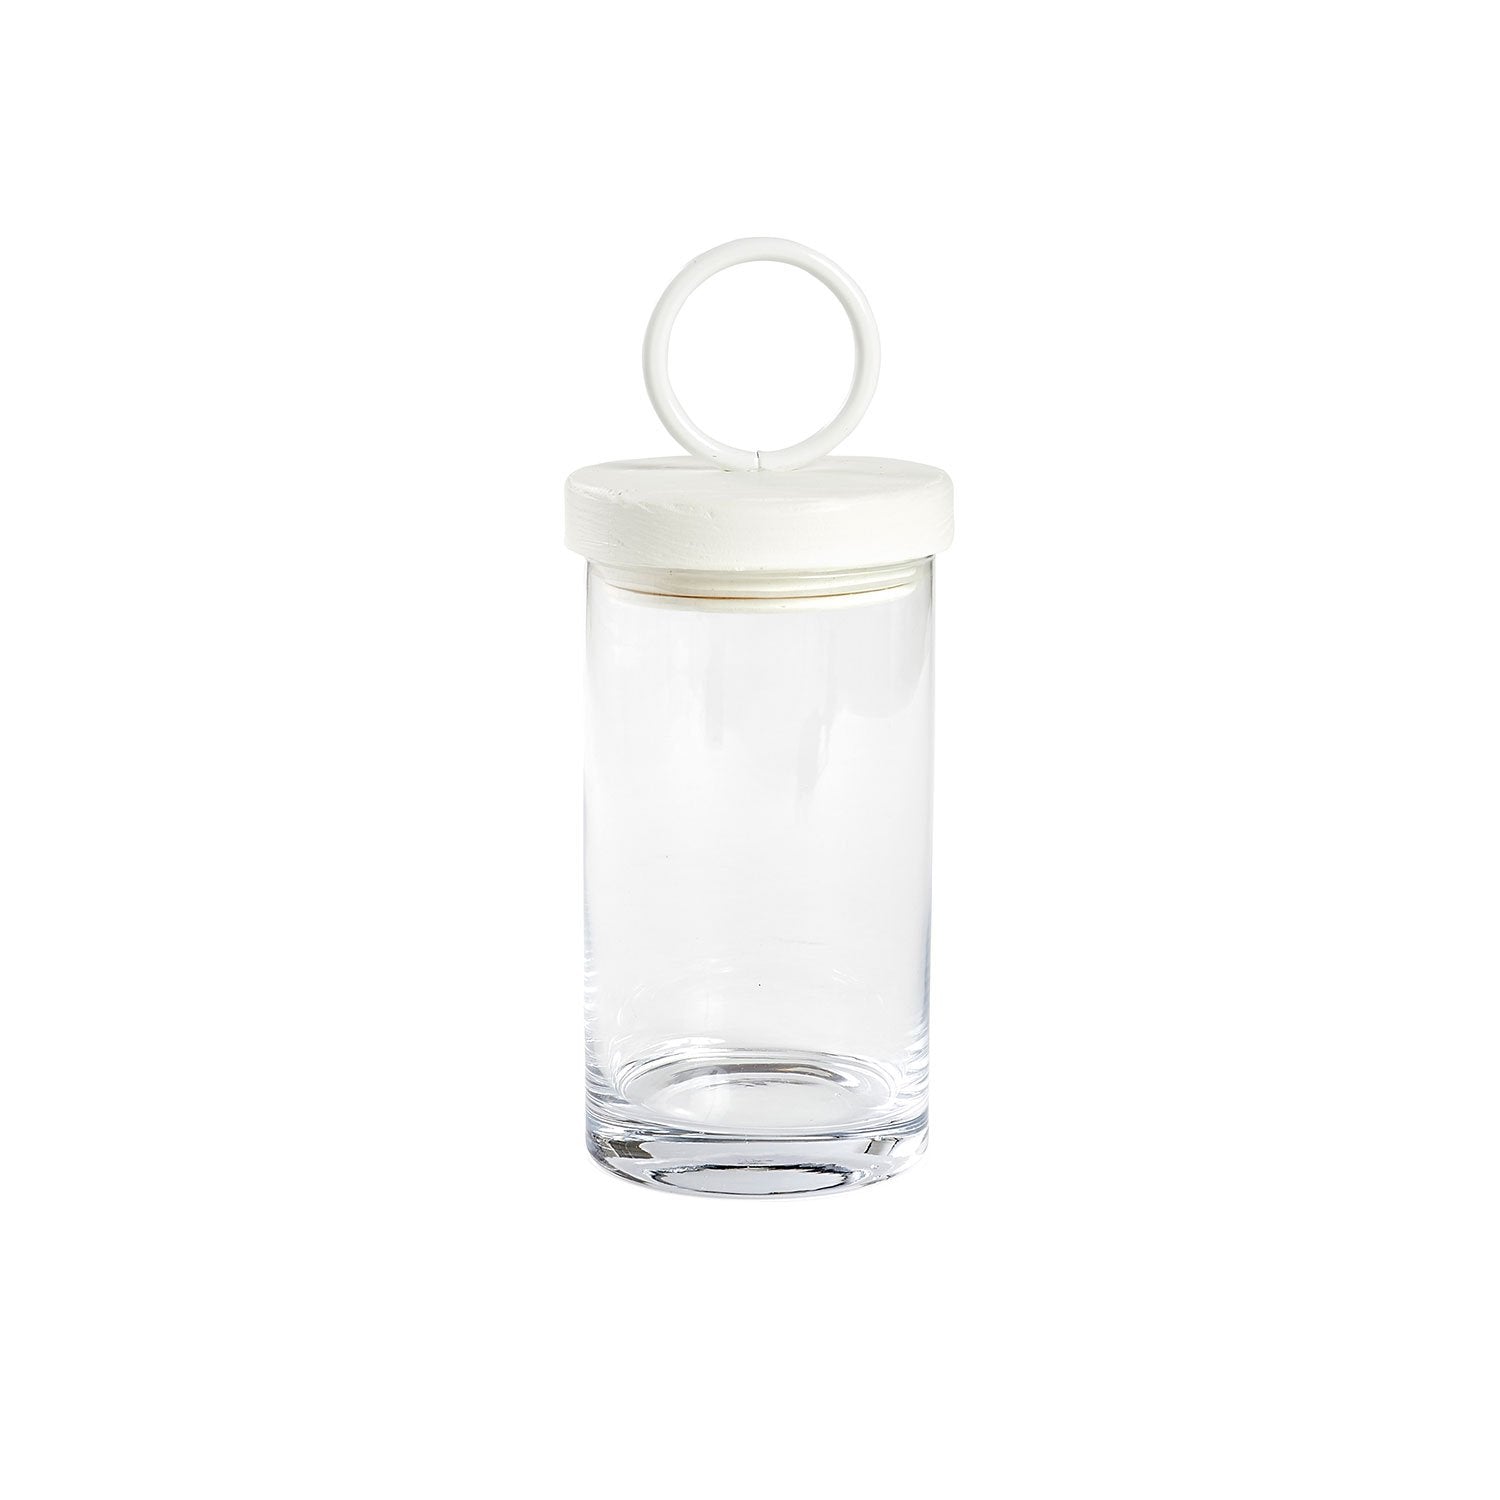 Medium Canister with White Ring Top